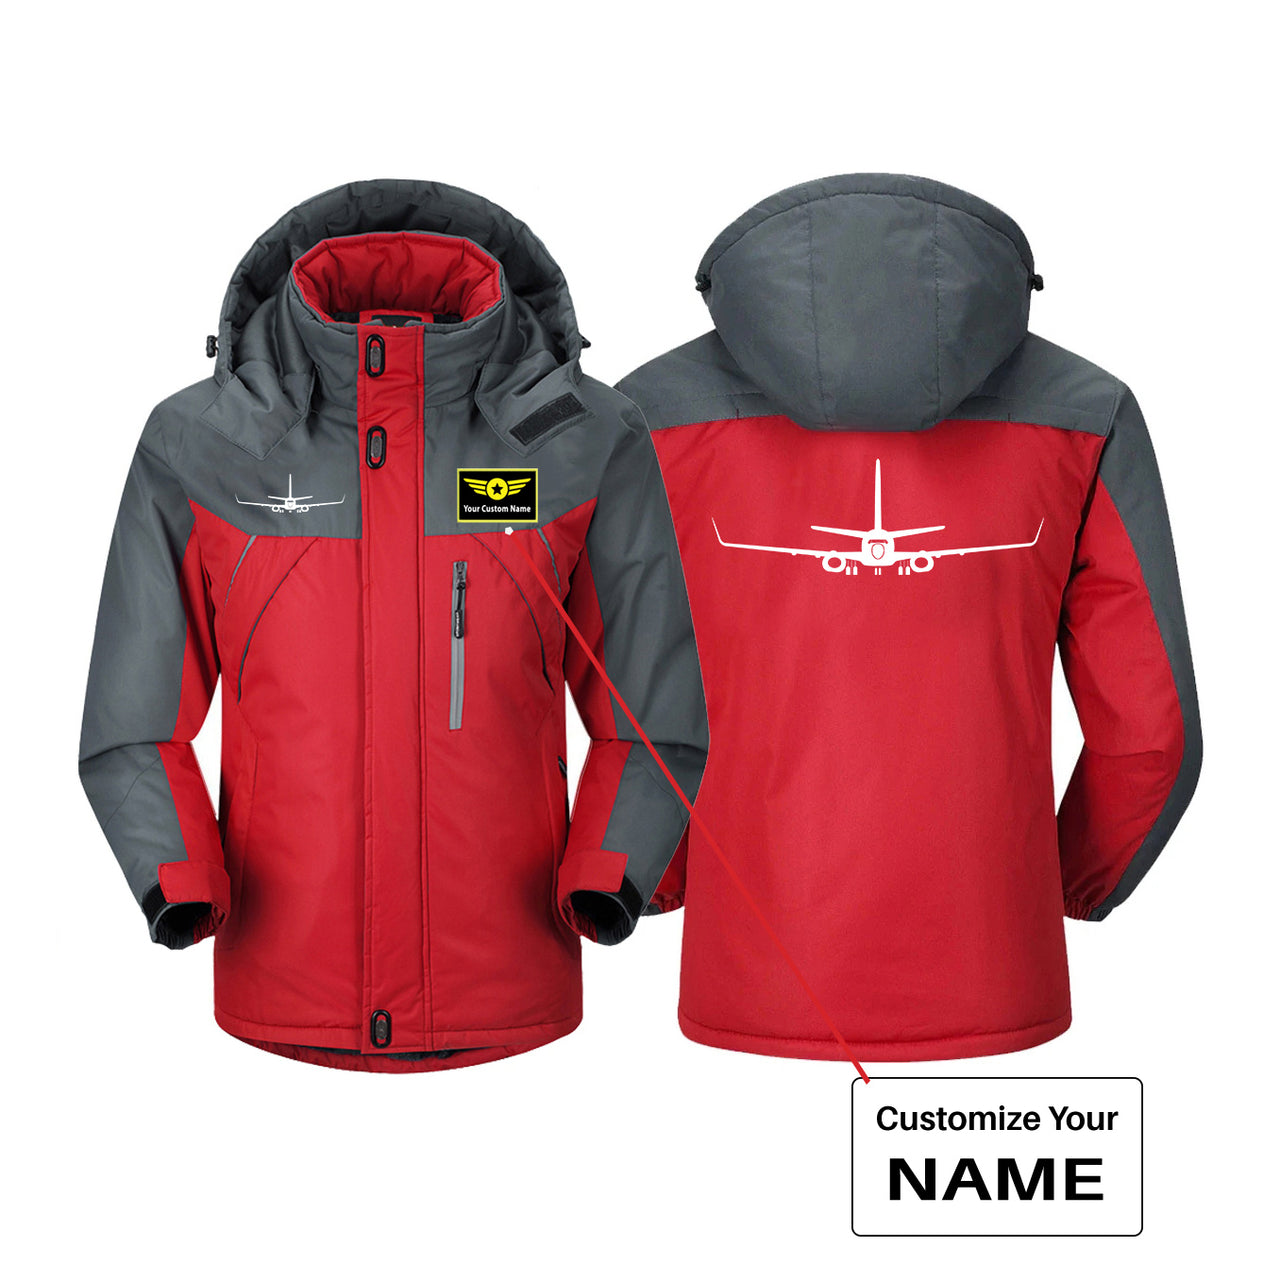 Boeing 737-800NG Silhouette Designed Thick Winter Jackets